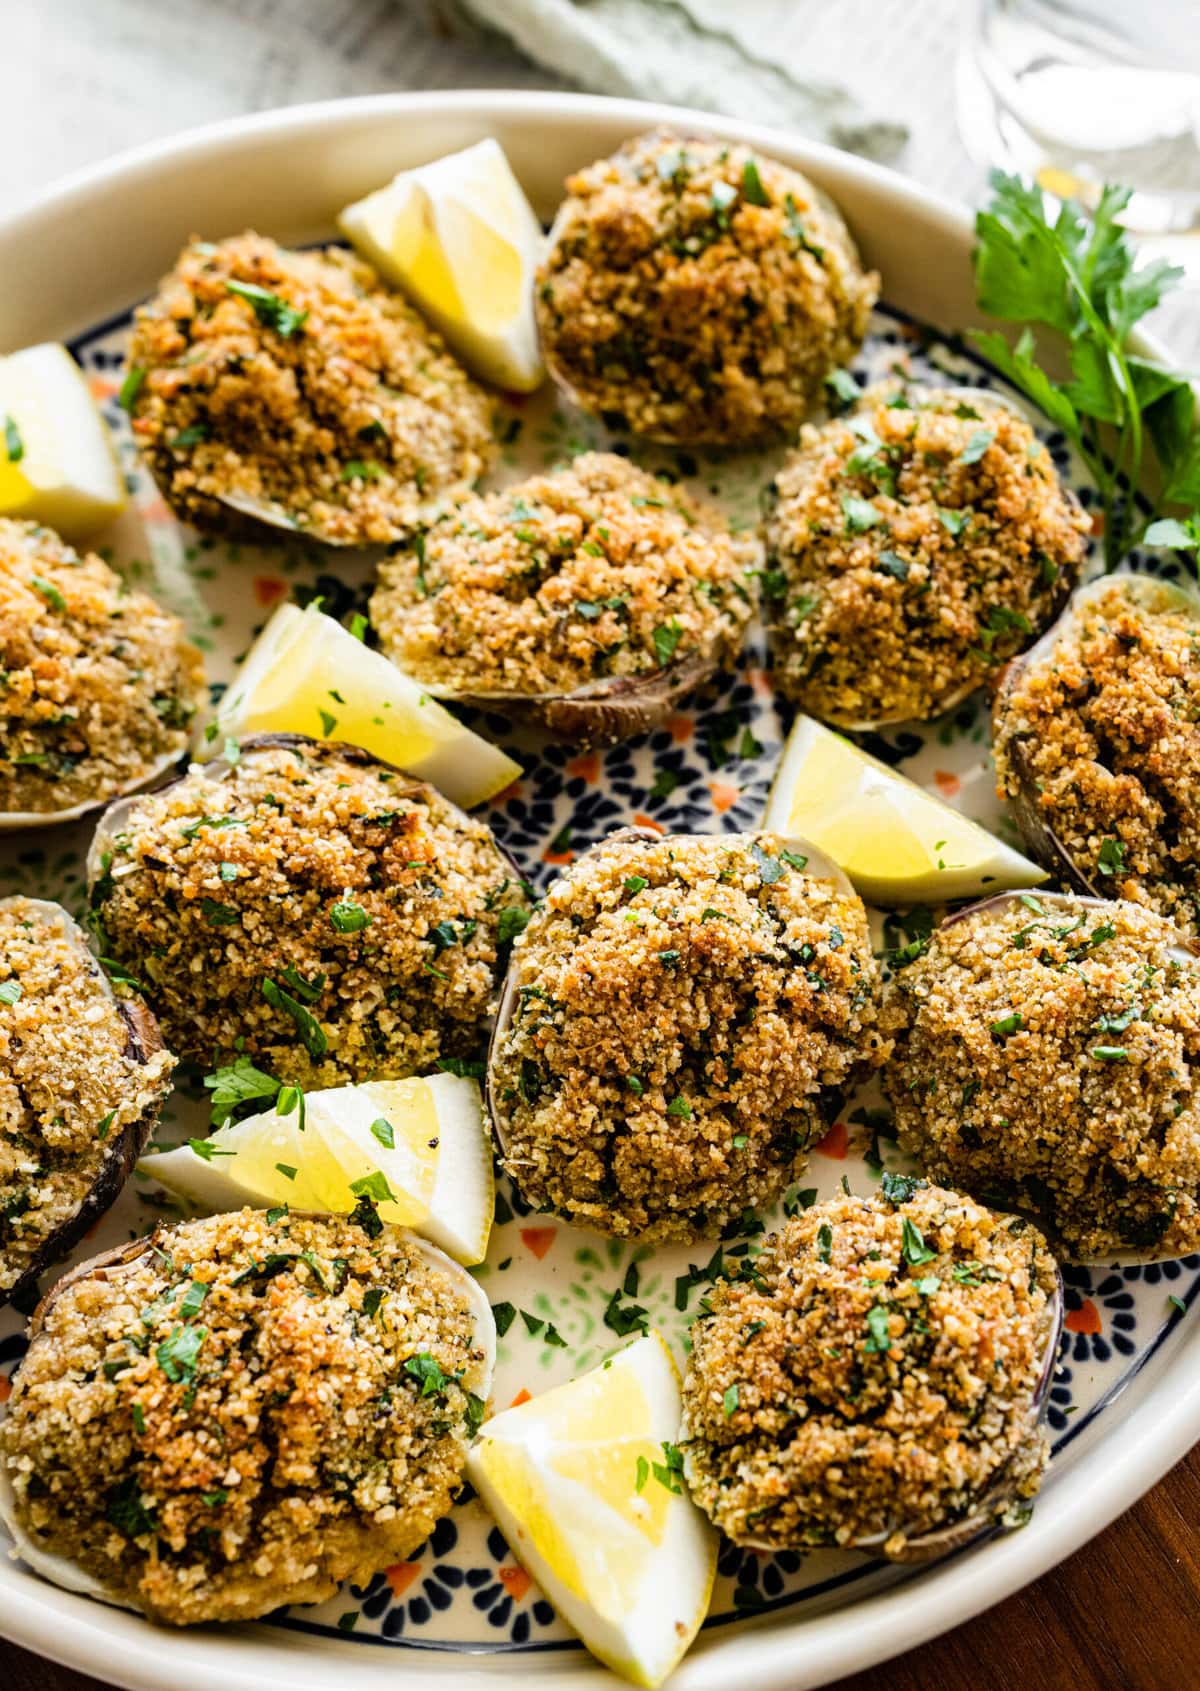 Best Italian Baked Stuffed Clams on a plate with lemon wedges and parsley.